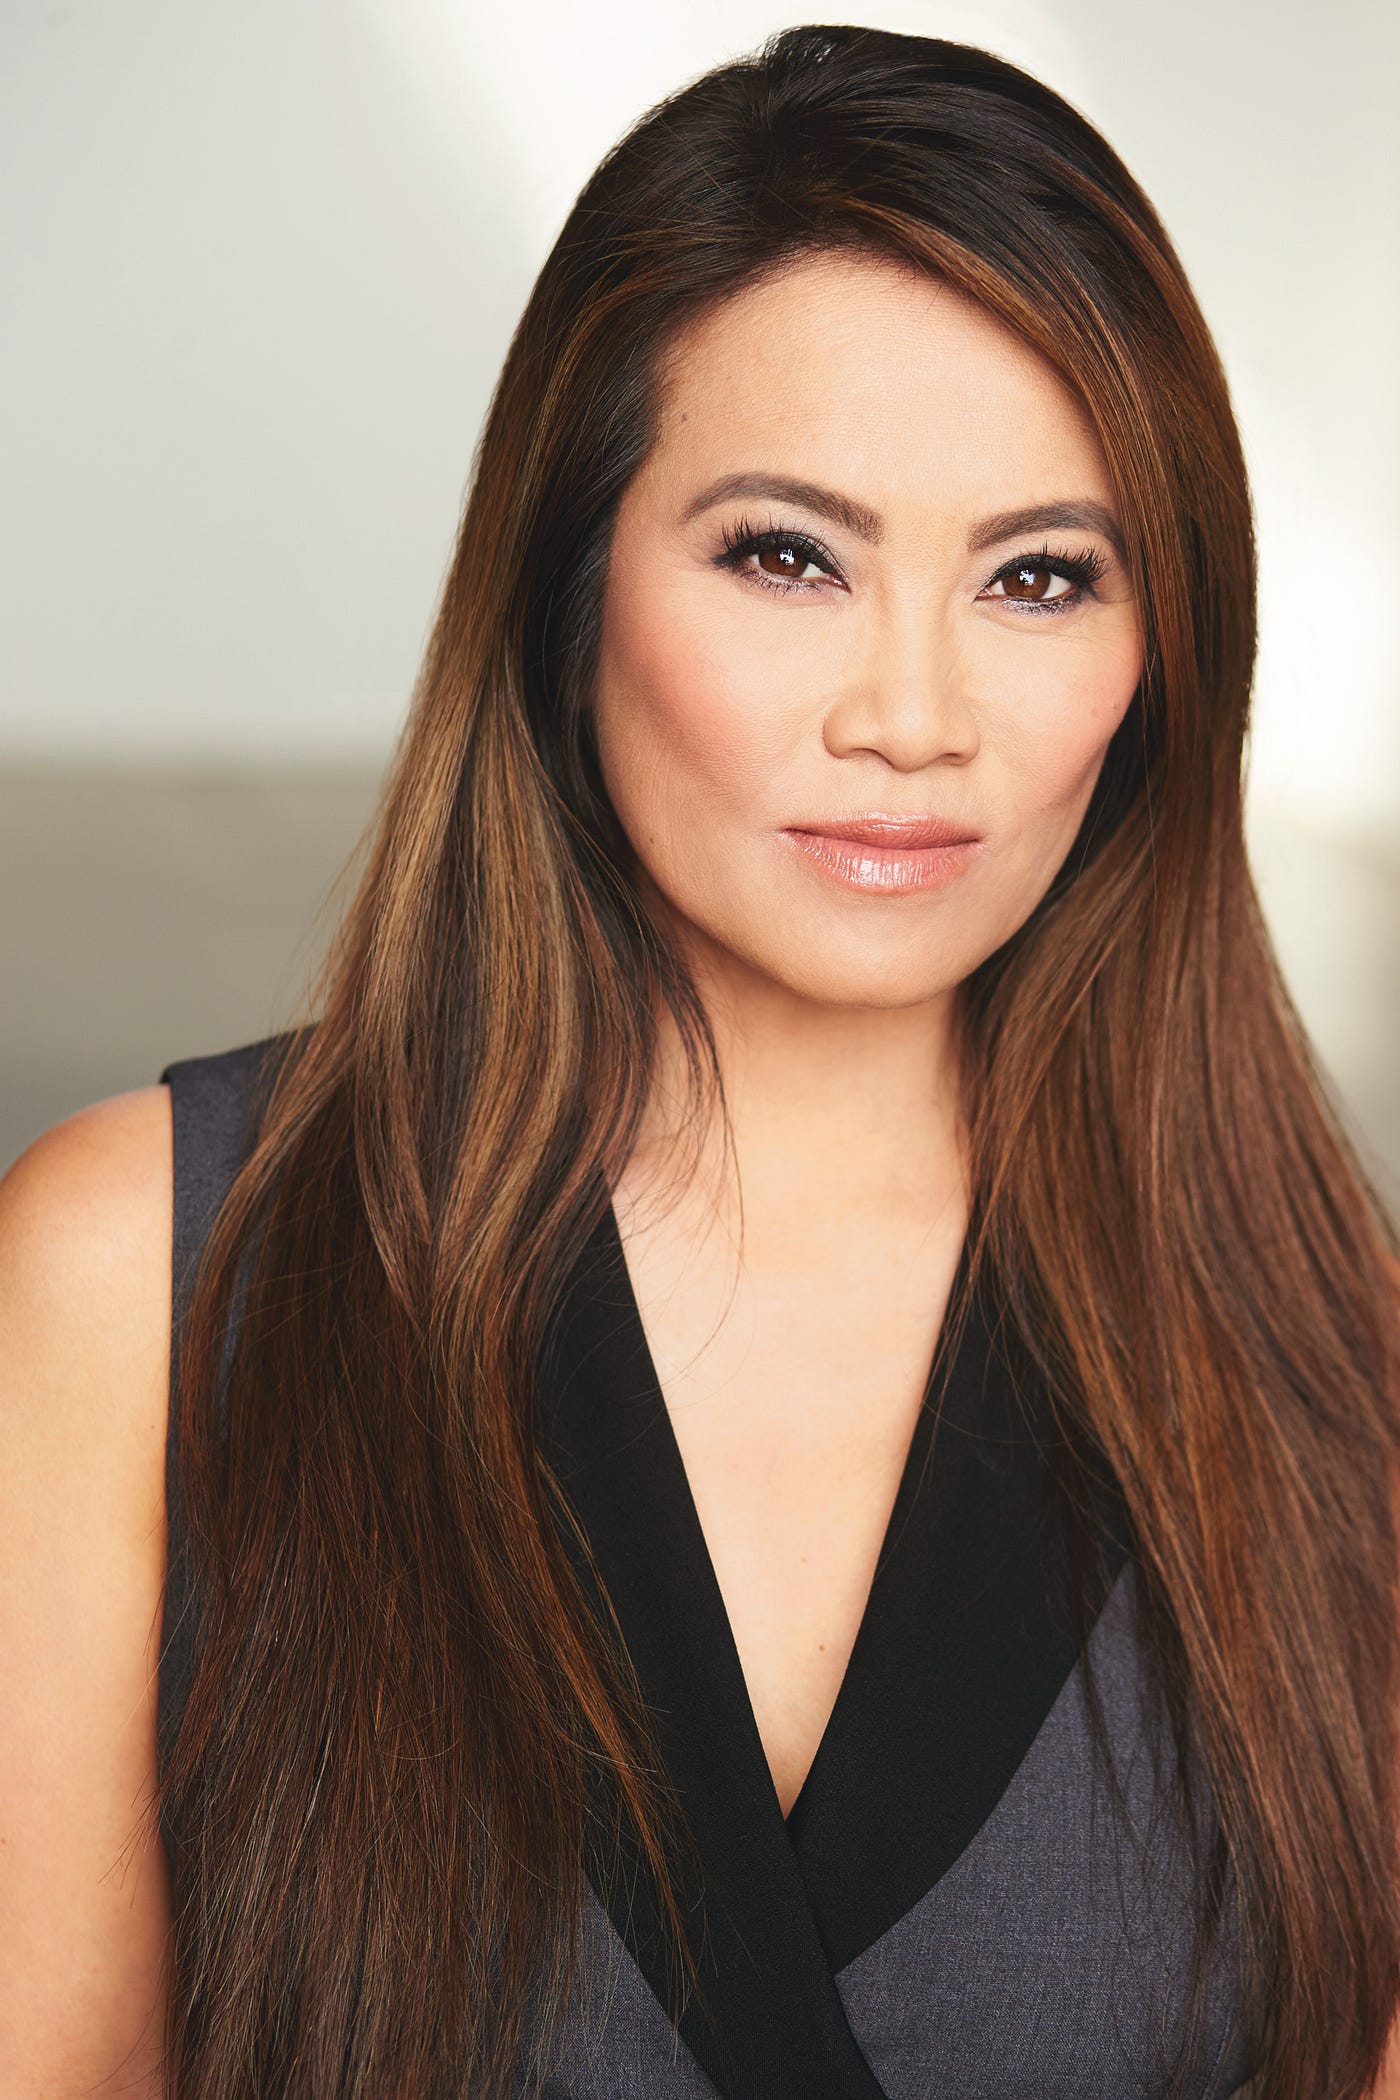 Dr. Sandra Lee, Dr. Pimple Popper: Five Things I Wish Someone Told